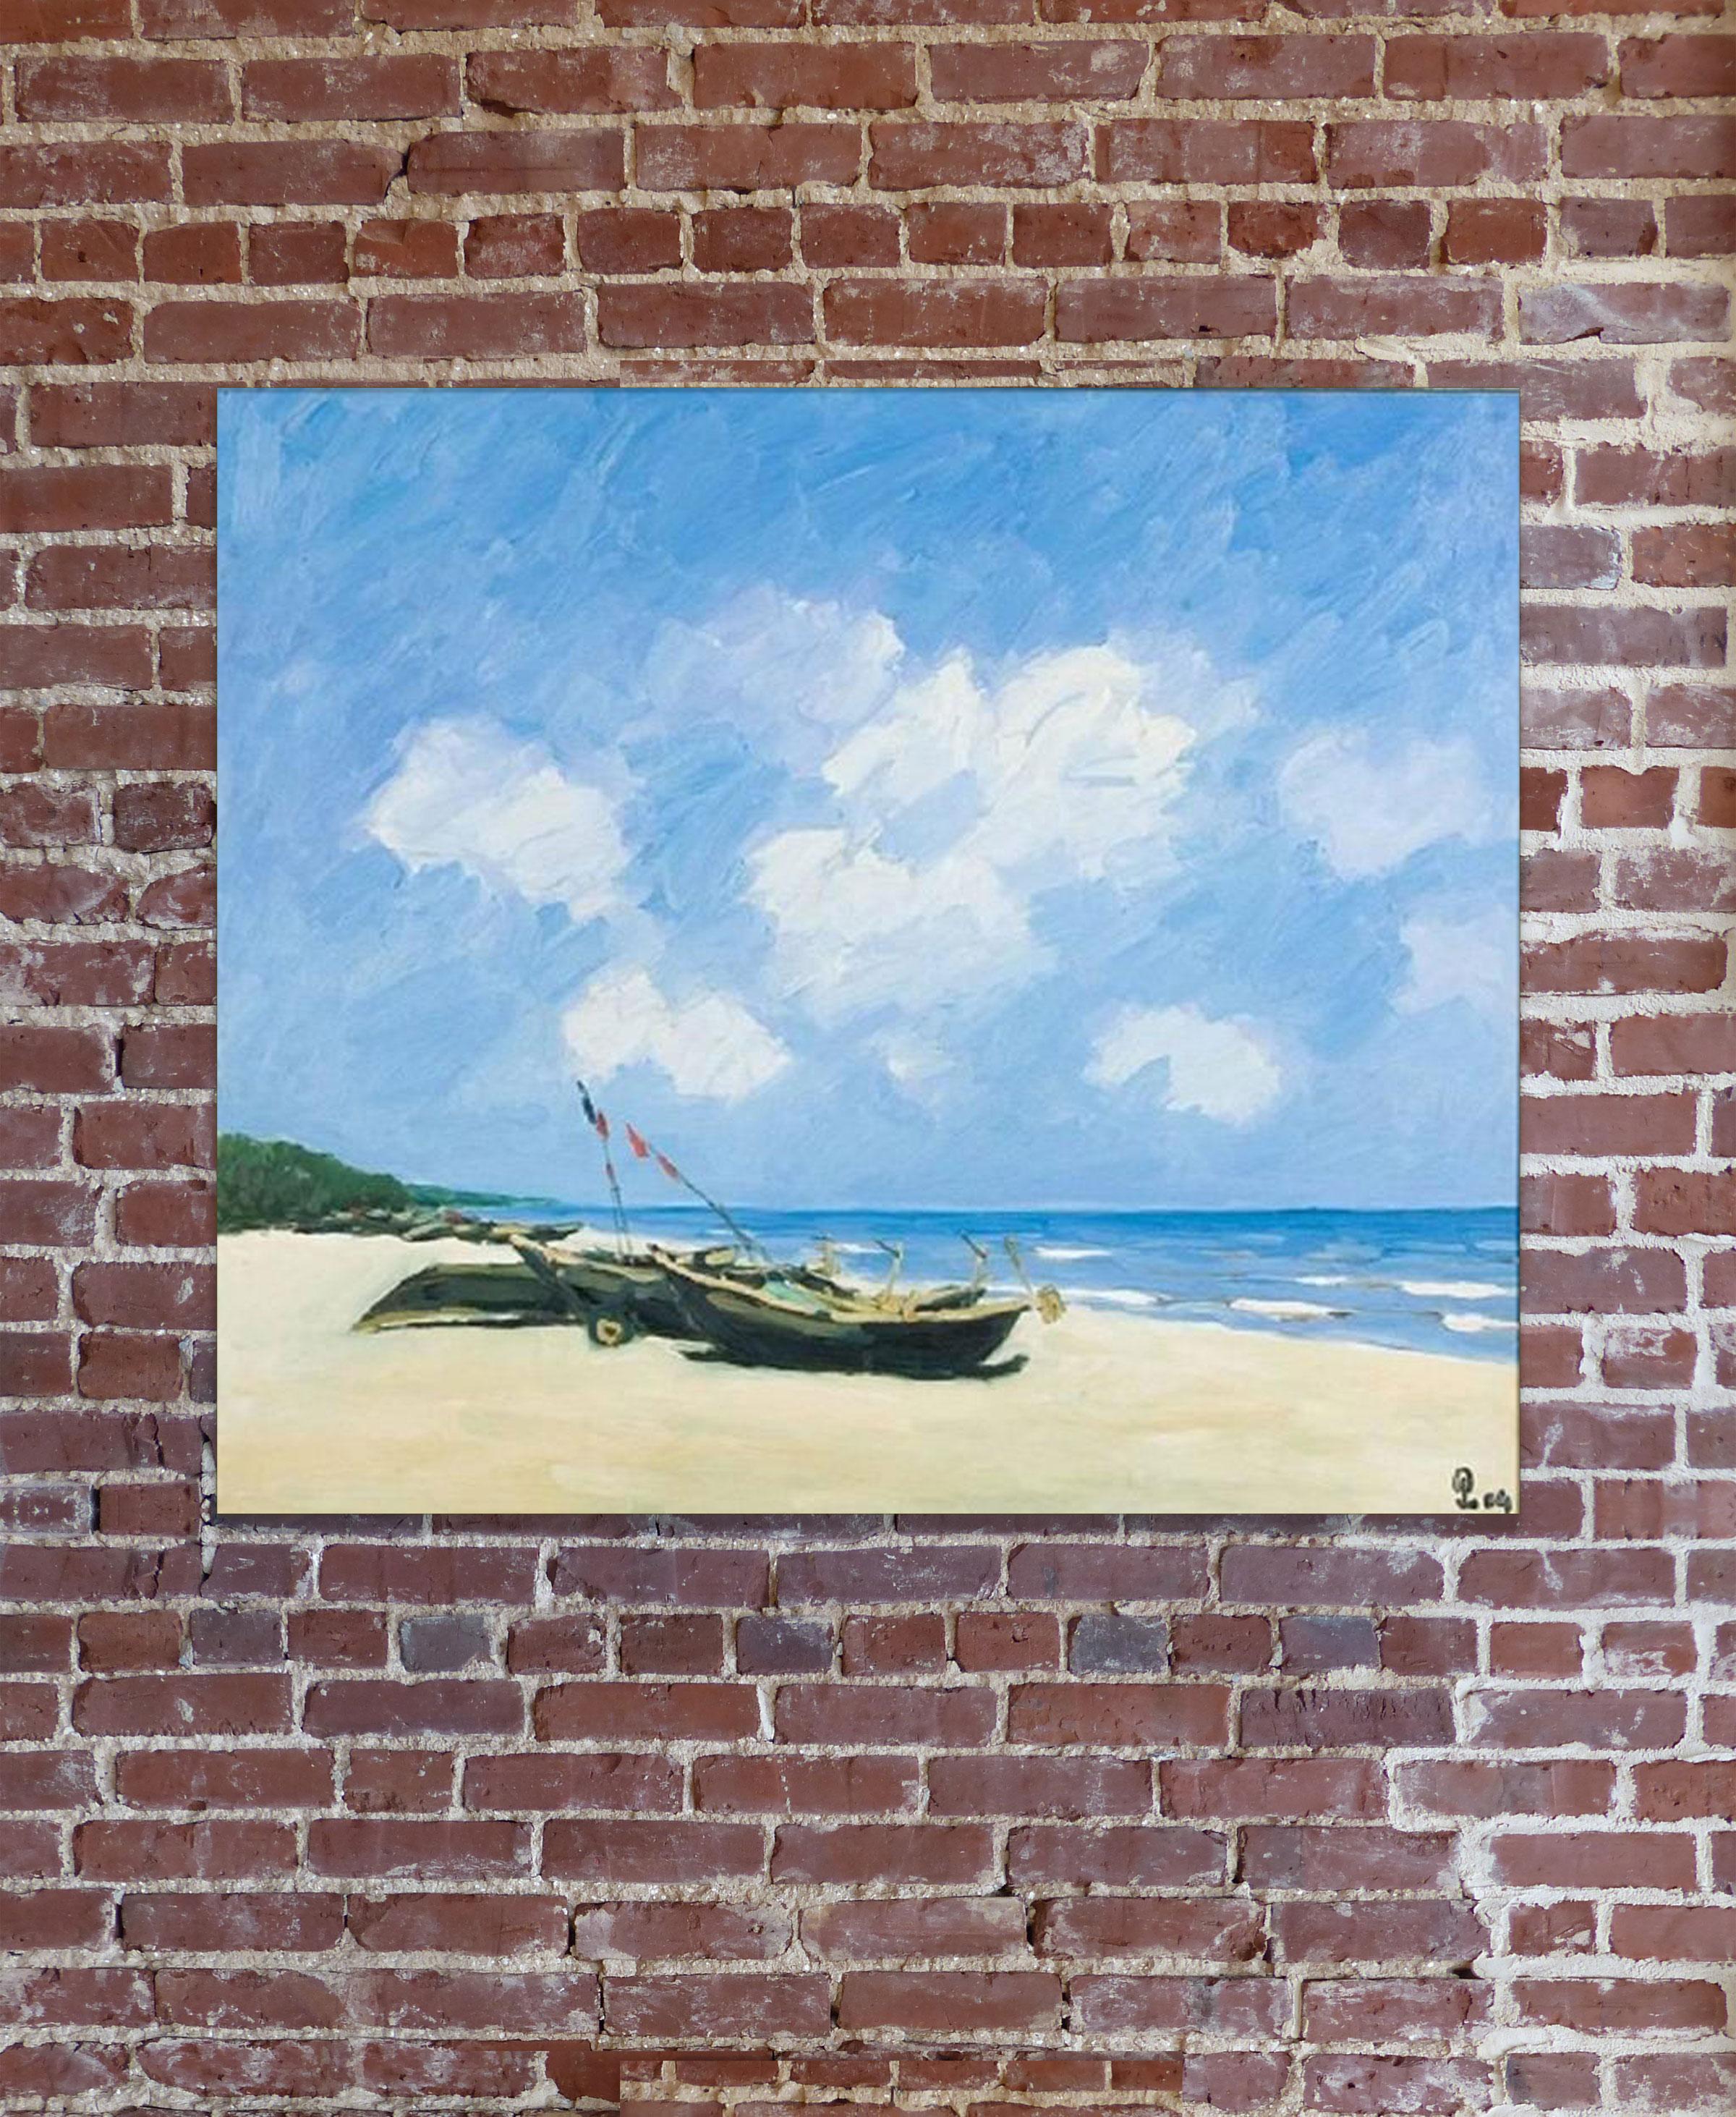 ‘Sav Jon Beach’ is a large framed Impressionist oil on canvas seascape painting created by Vietnamese artist Pham Luan in 2004. Featuring a soft palette made of blue, beige and green, the painting is a true portrait of one of Vietnam’s many stunning